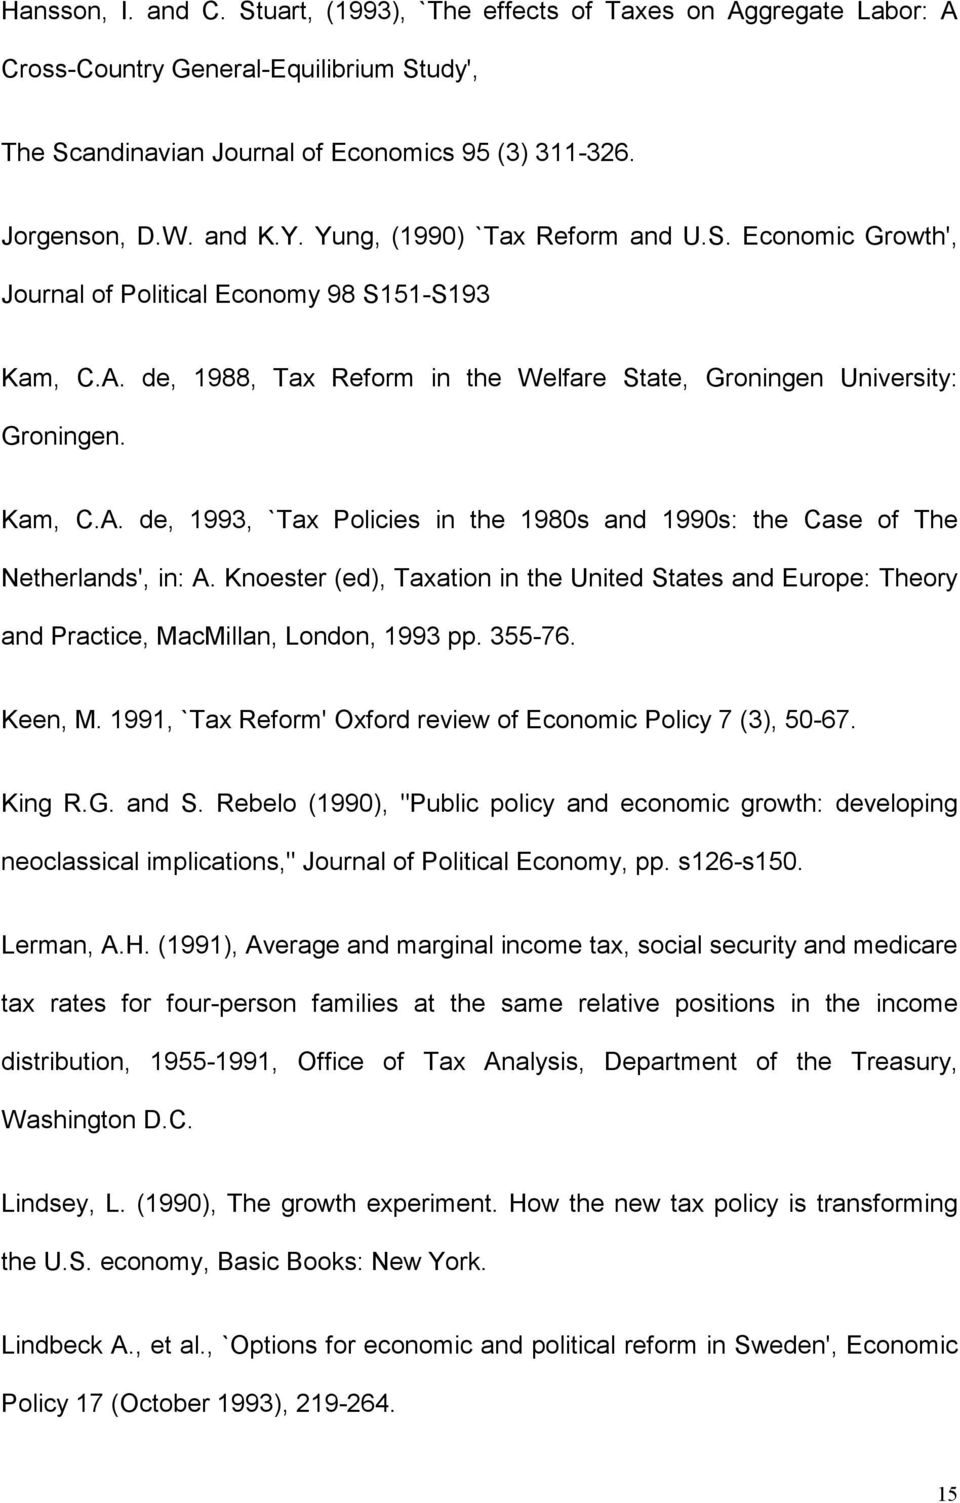 Knoester (ed), Taxation in the United States and Europe: Theory and Practice, MacMillan, London, 1993 pp. 355-76. Keen, M. 1991, `Tax Reform' Oxford review of Economic Policy 7 (3), 50-67. King R.G.